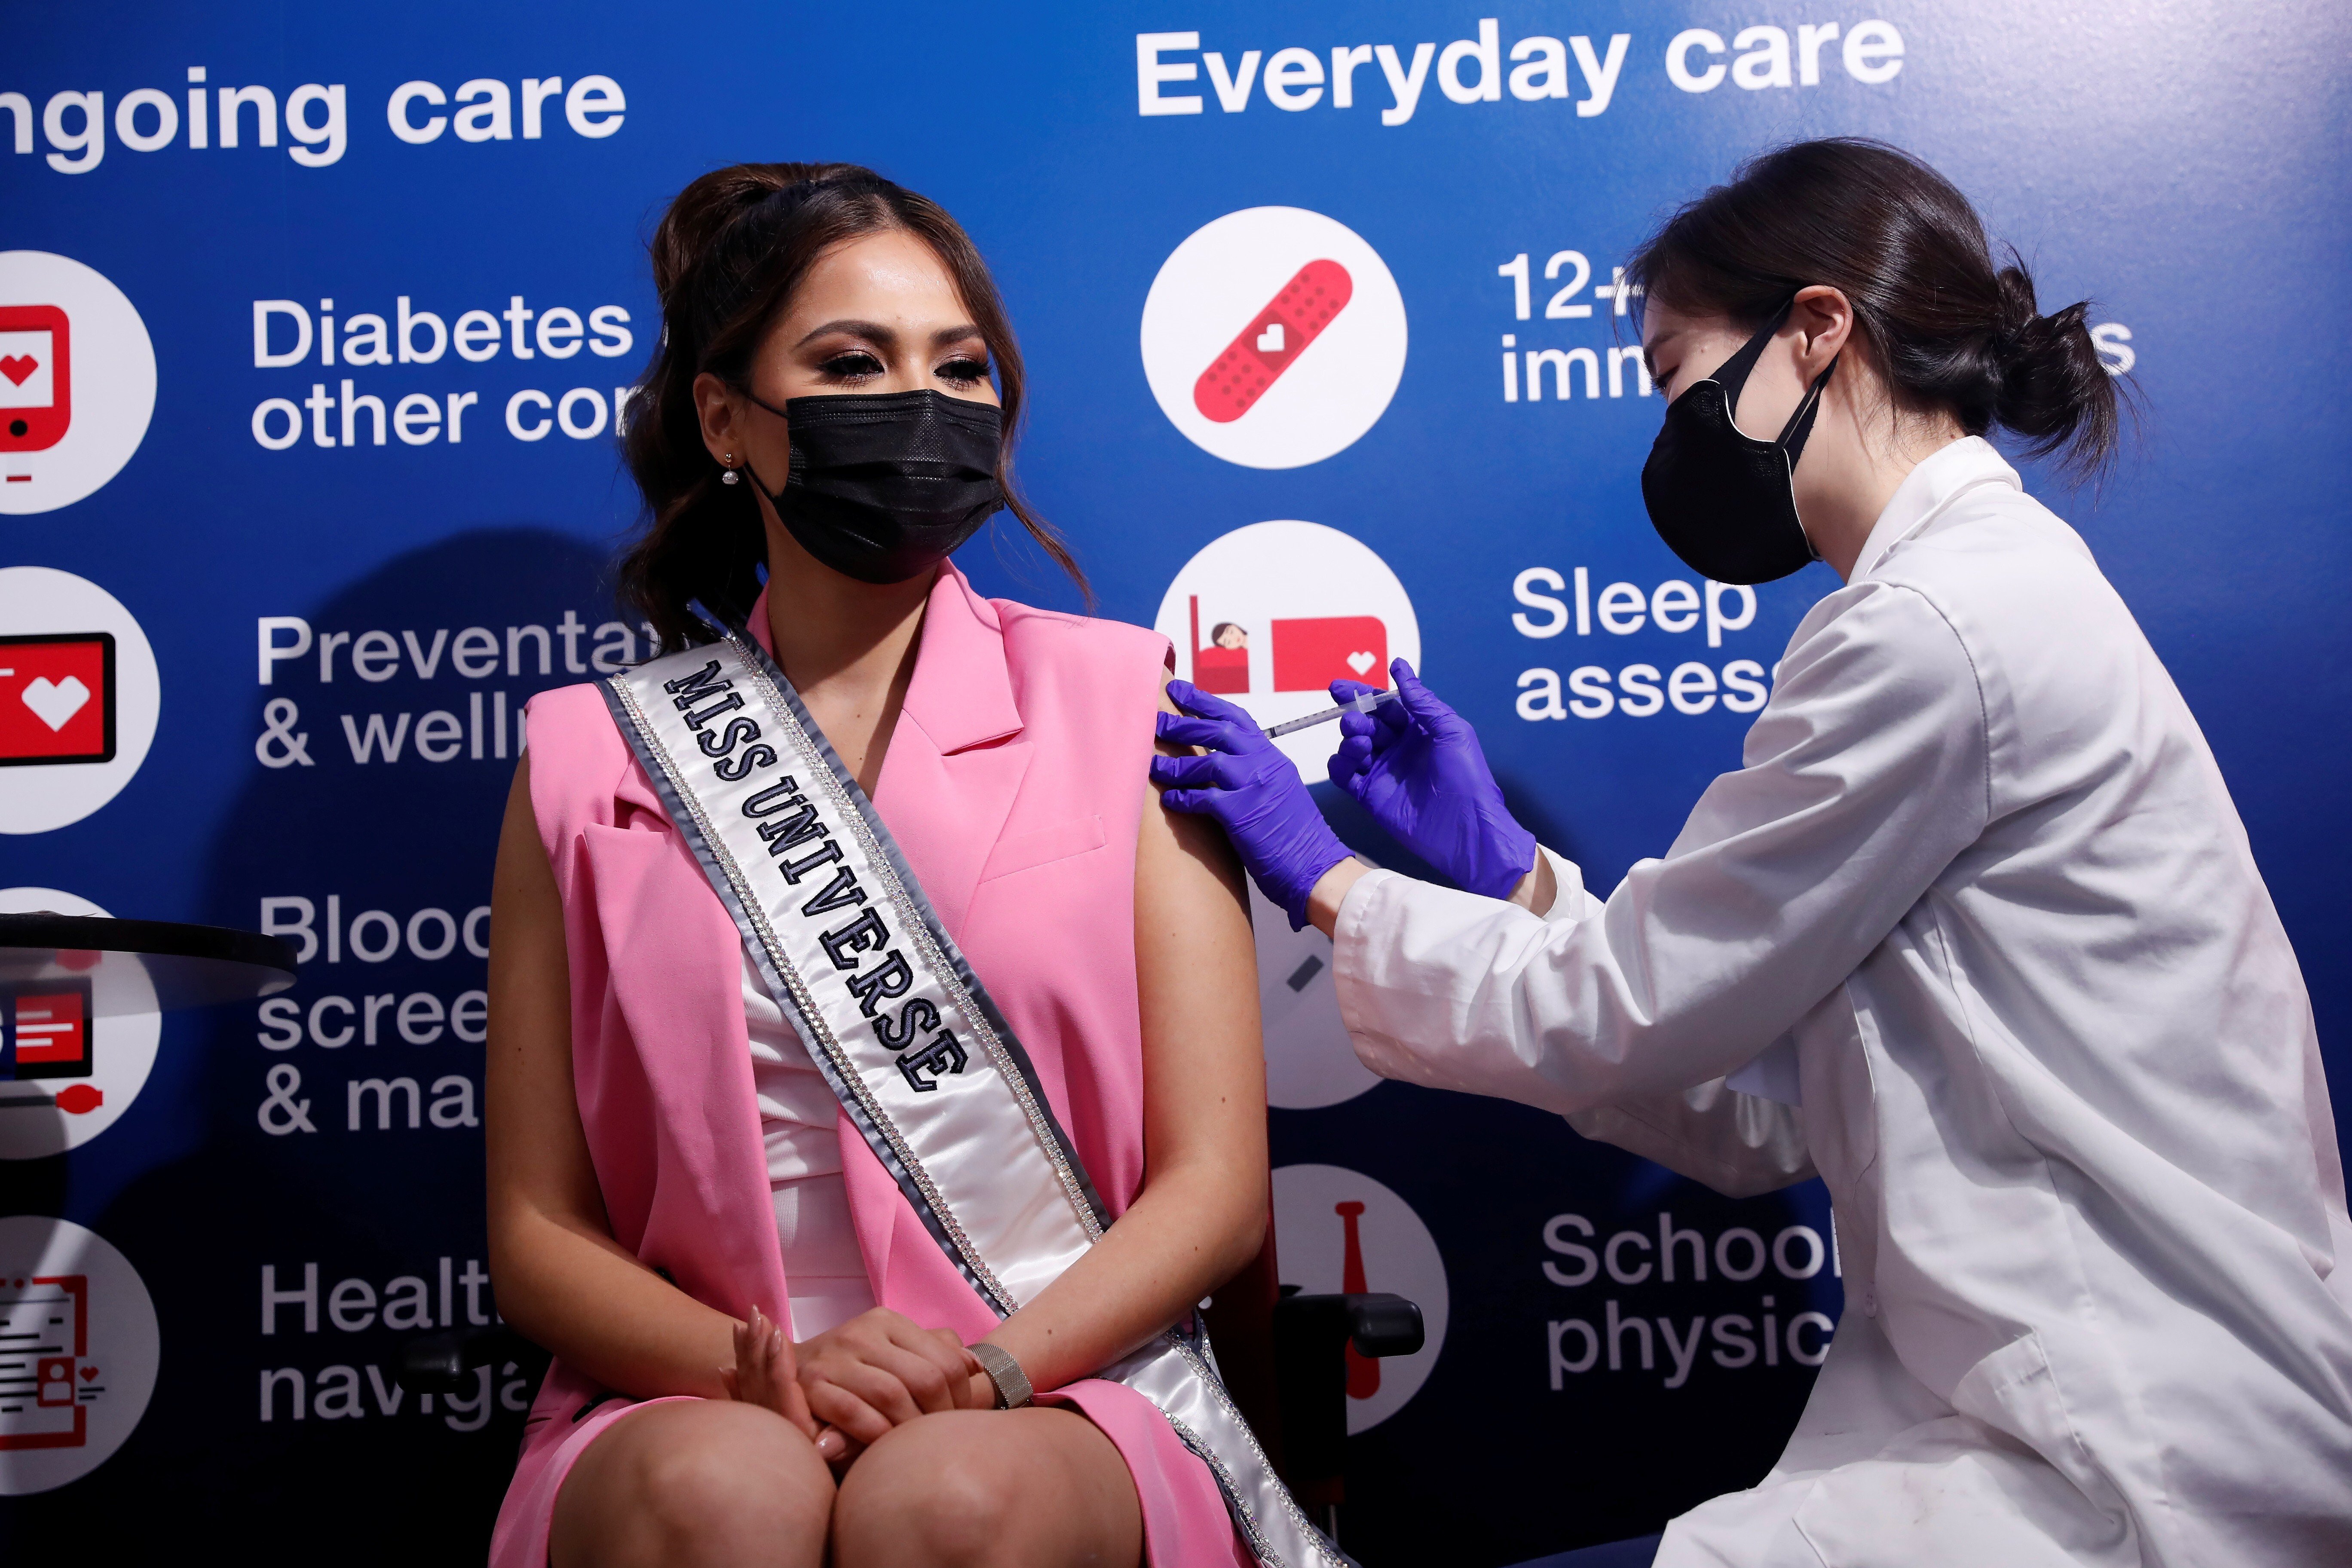 Miss Universe Andrea Meza, of Mexico, winner of the 69th annual Miss Universe competition, receives a dose of the Pfizer-BioNTech vaccine at a CVS Pharmacy store in Manhattan, New York City, on May 26. In the US, half of the country’s adults are fully vaccinated. Photo: Reuters